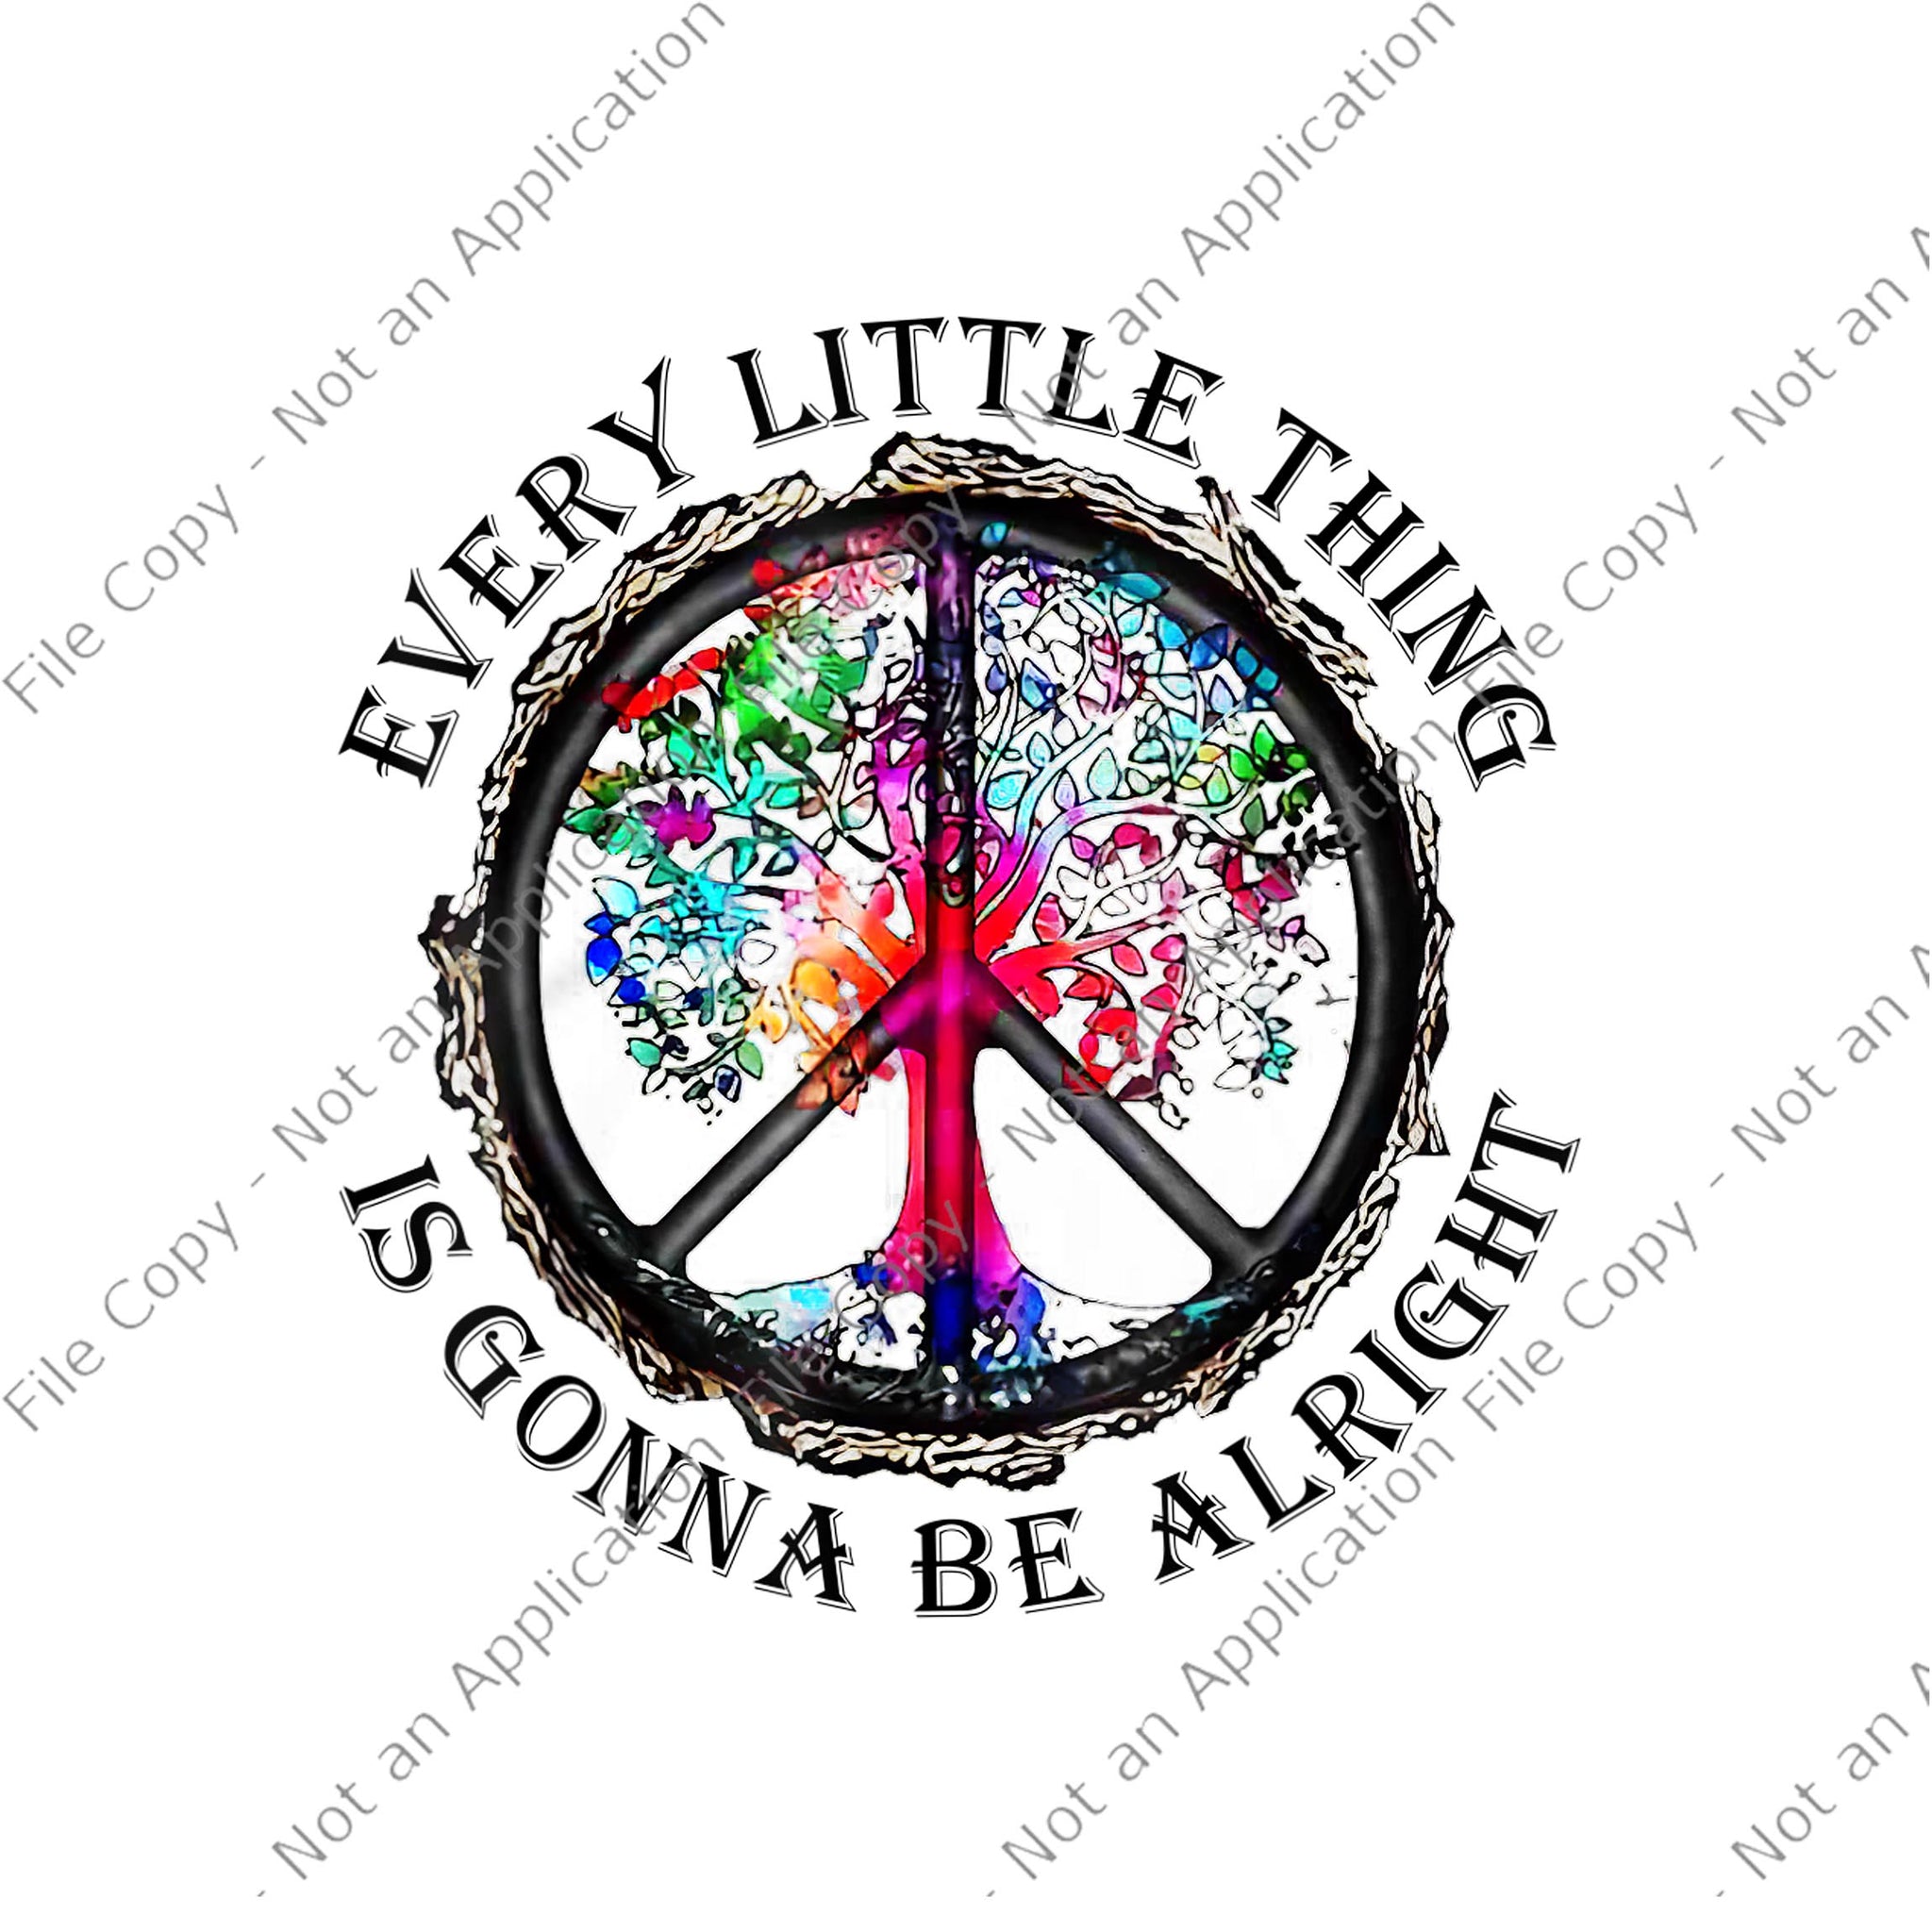 Every little thing is gonna be alright PNG, Every little thing is gonna be alright Yoga tree root color png, tree root color PNG, tree root color vector